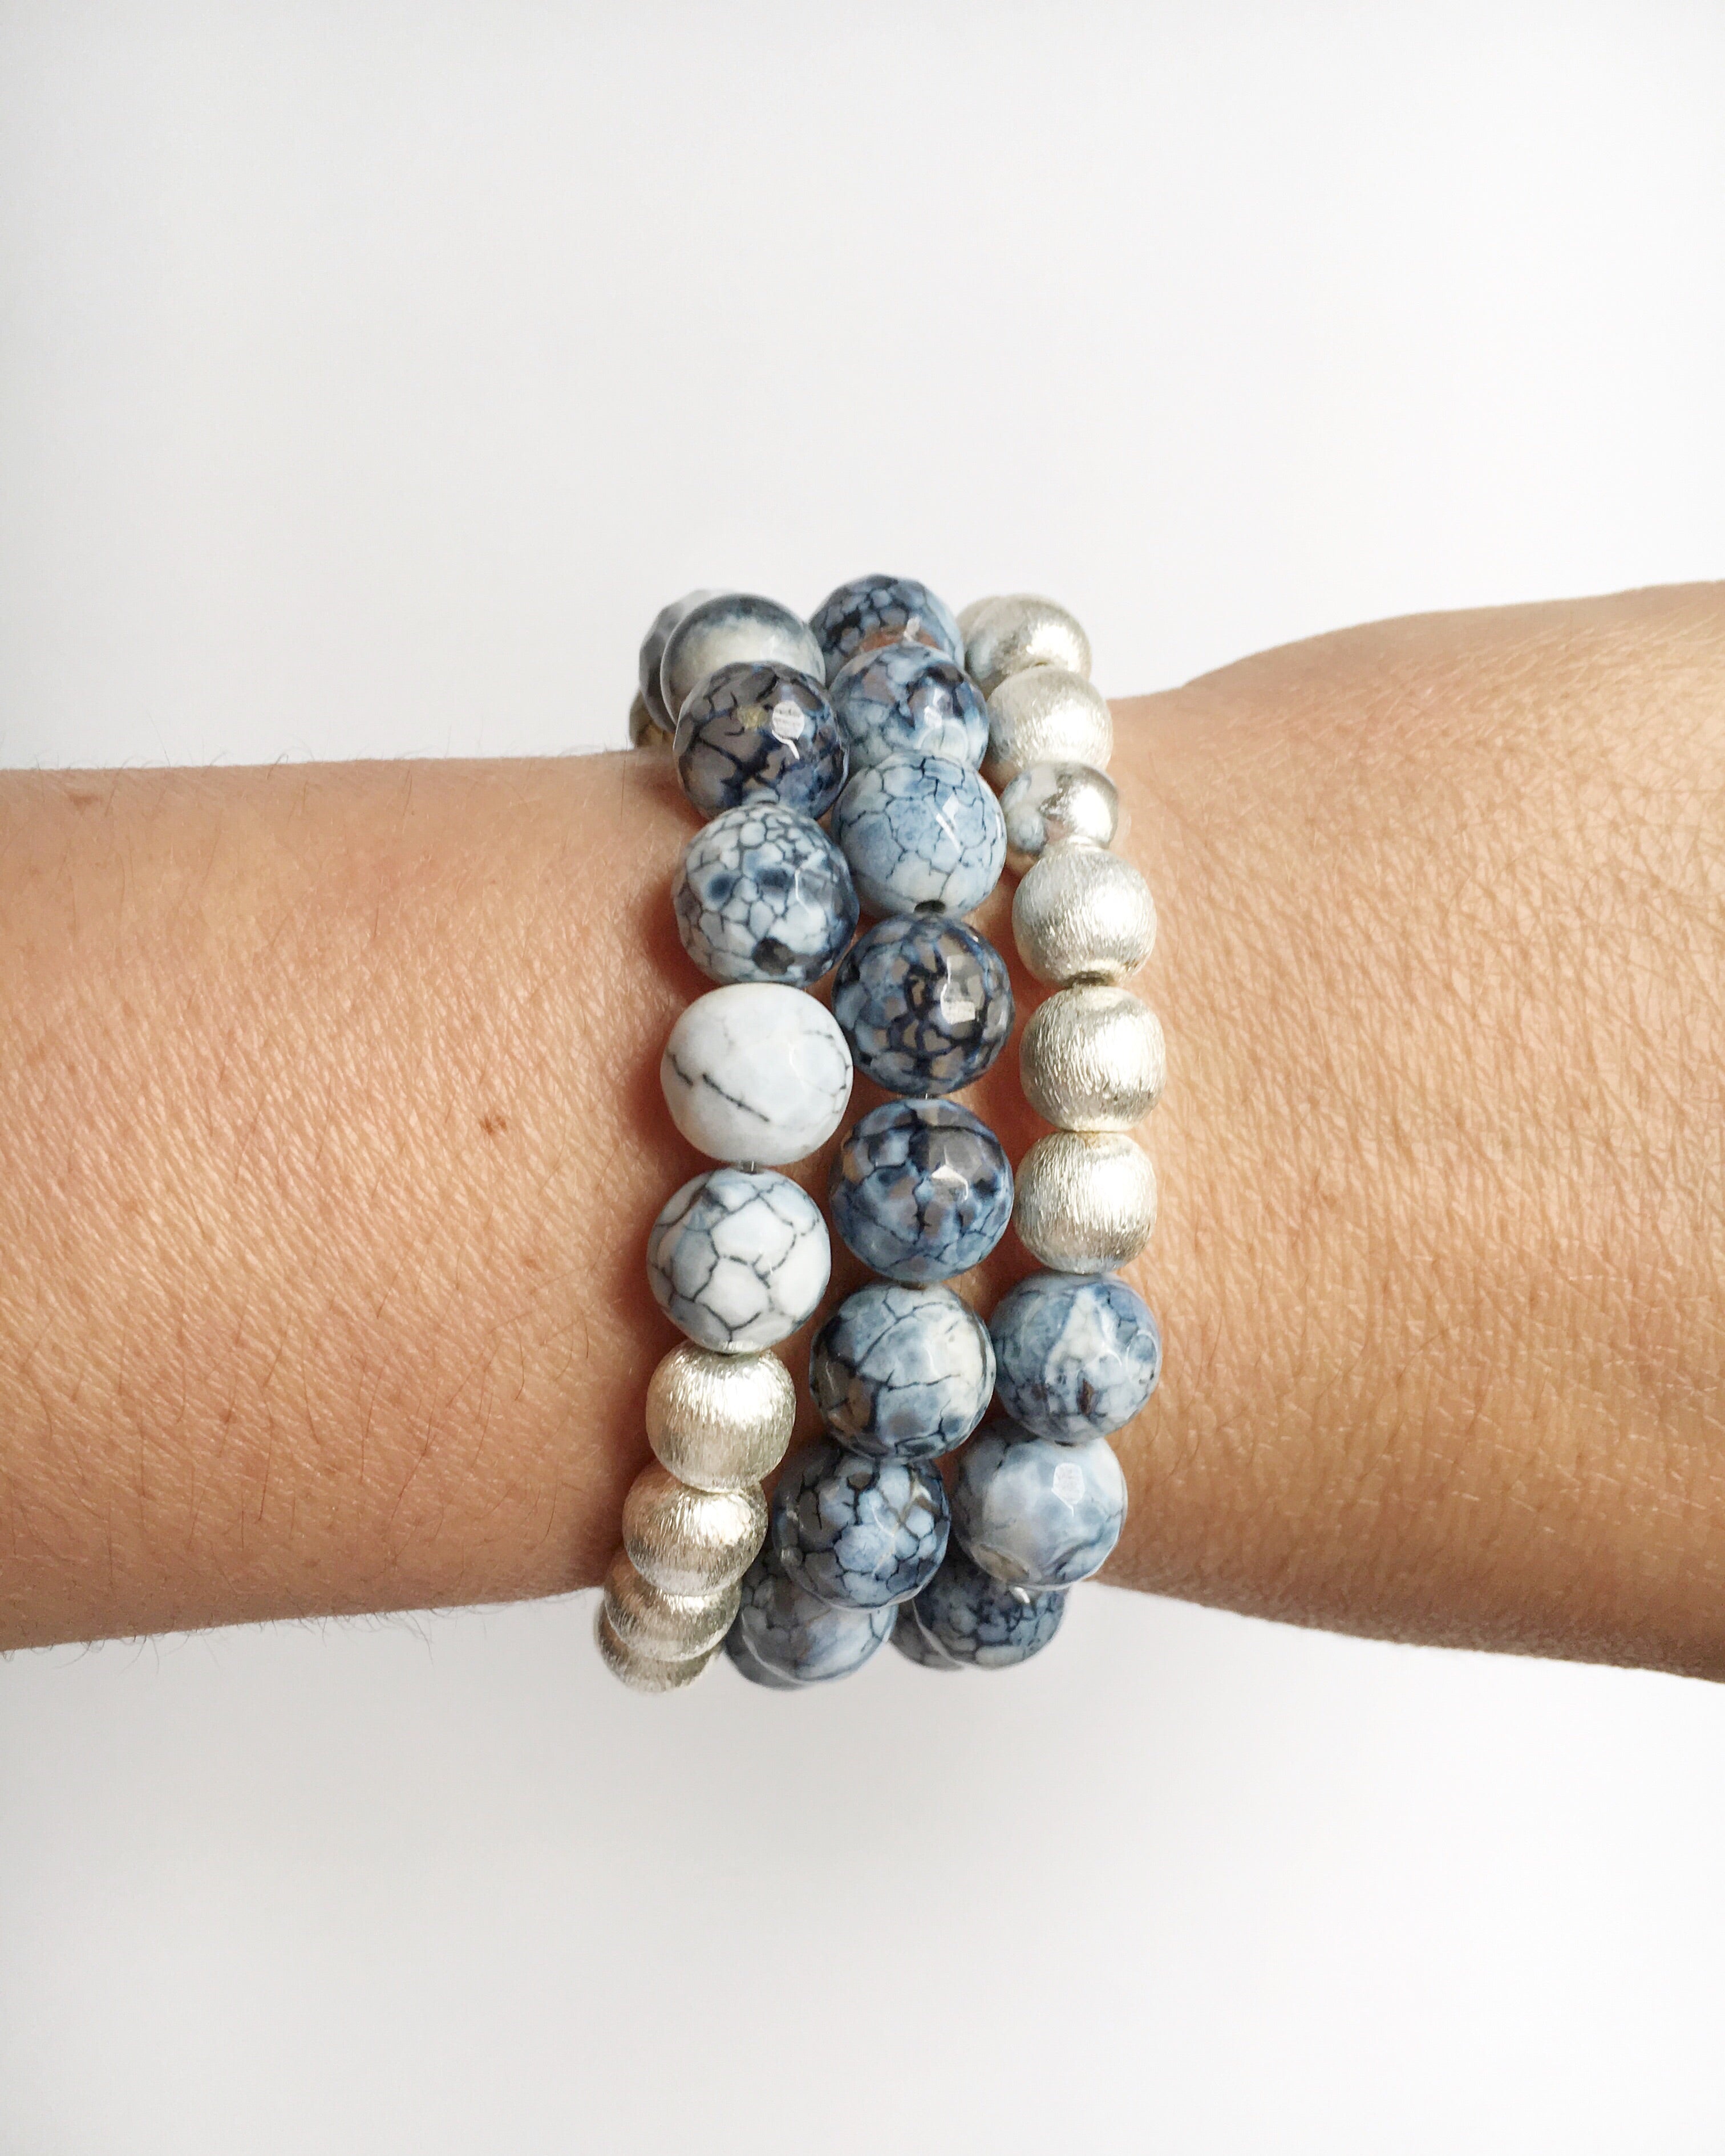 Women's wrist wearing three Black Lace Agate and Silver Stacking Beaded Stretch Bracelets